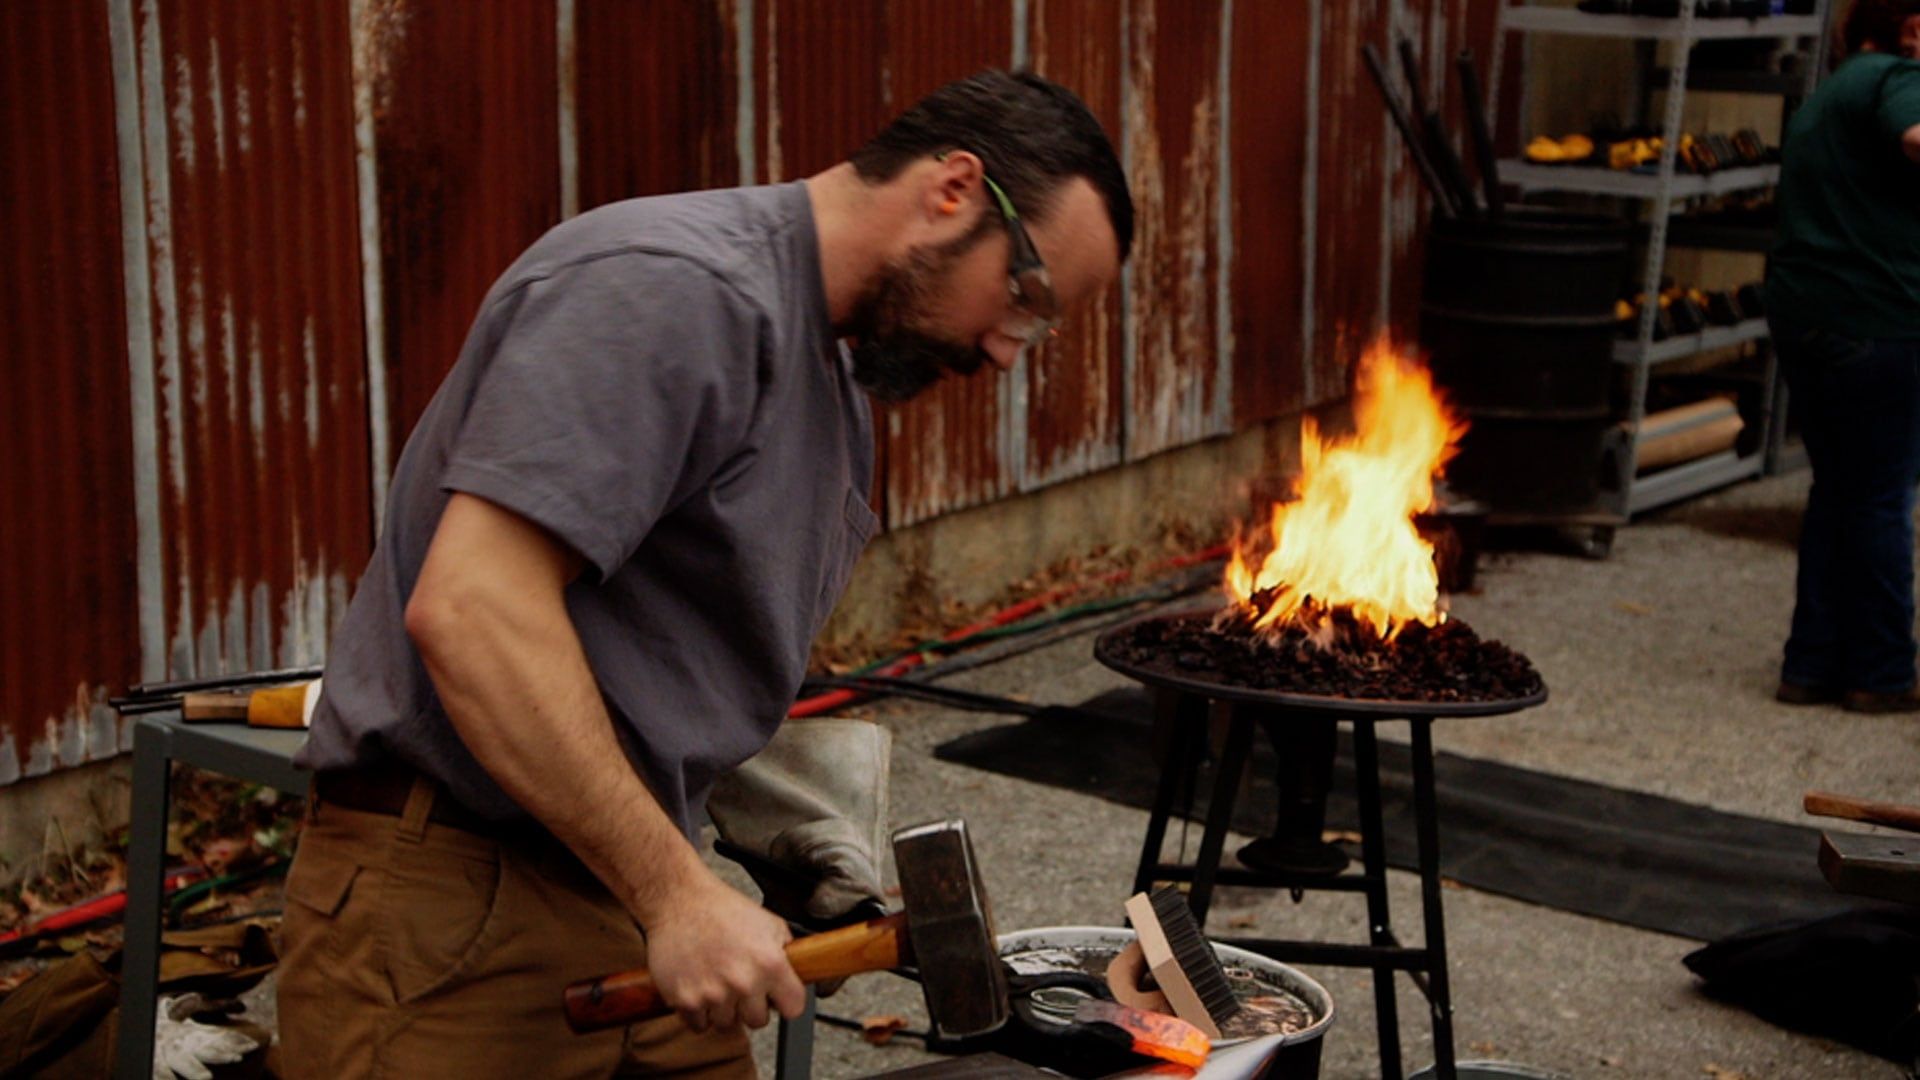 Forged in Fire Temporada 6 - assista episódios online streaming